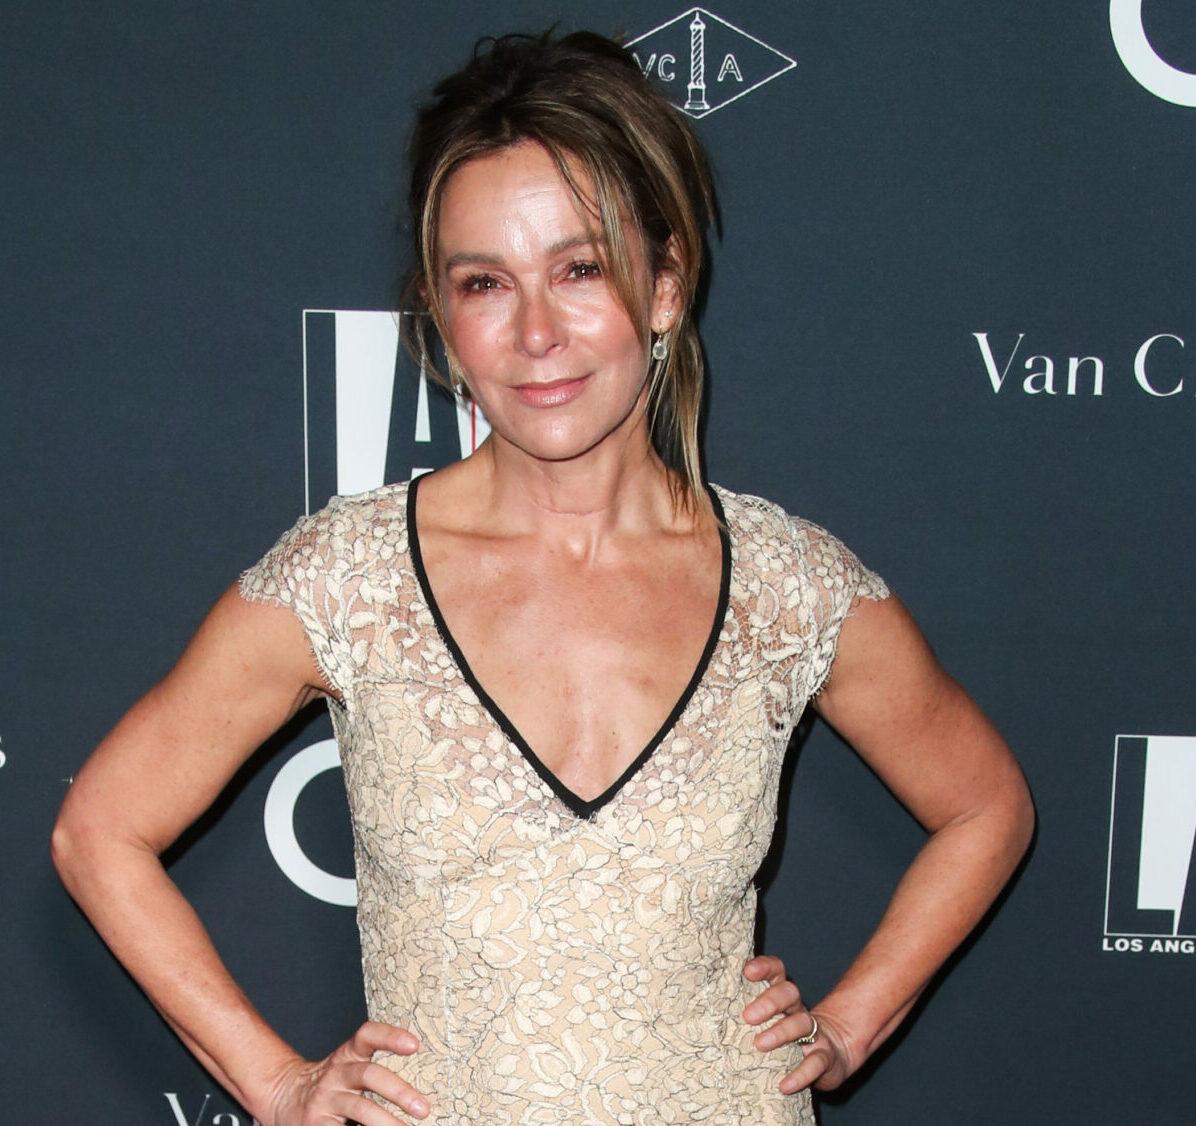 Dance Project's Annual Gala held at L.A. Dance Project on October 7, 2017 in Los Angeles, California, United States. 07 Oct 2017 Pictured: Jennifer Grey.